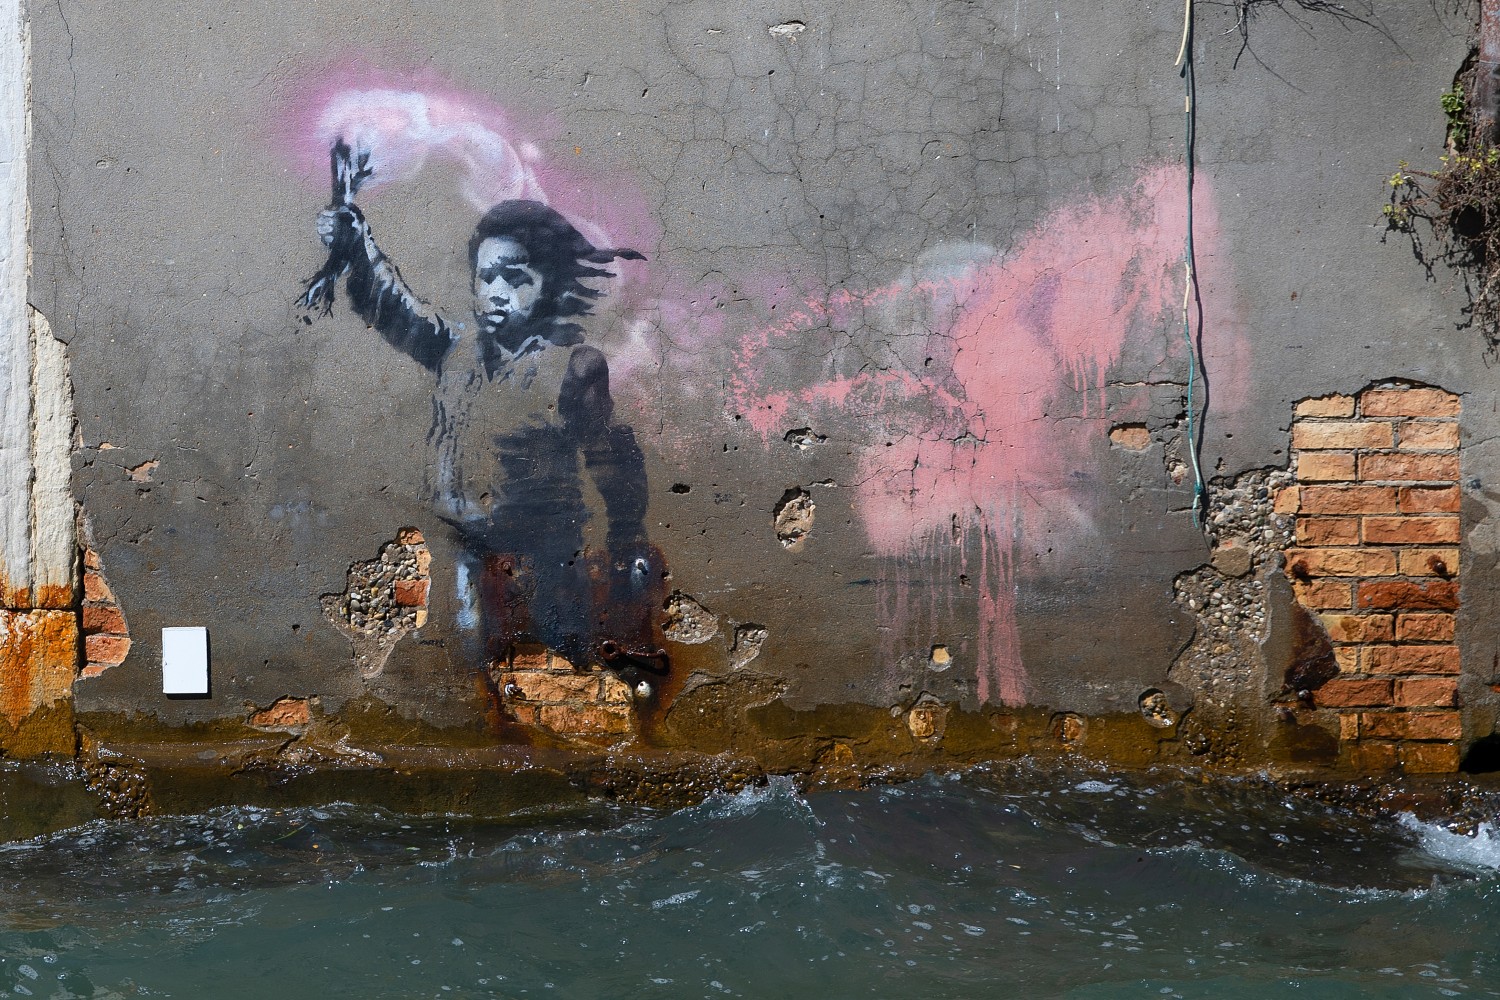 How Do You Restore a Banksy Mural? Venice Is Working on It